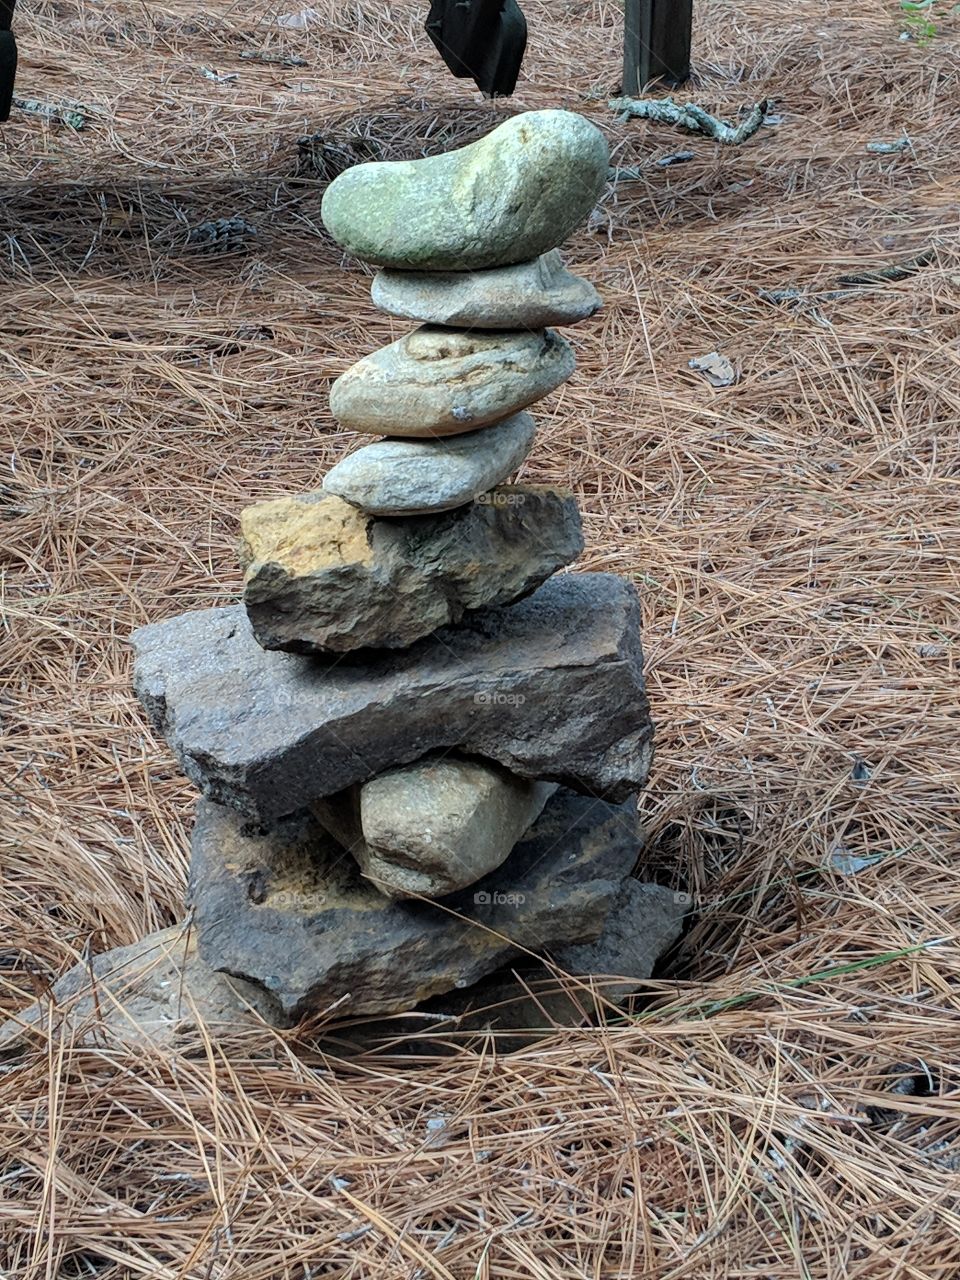 rock tower